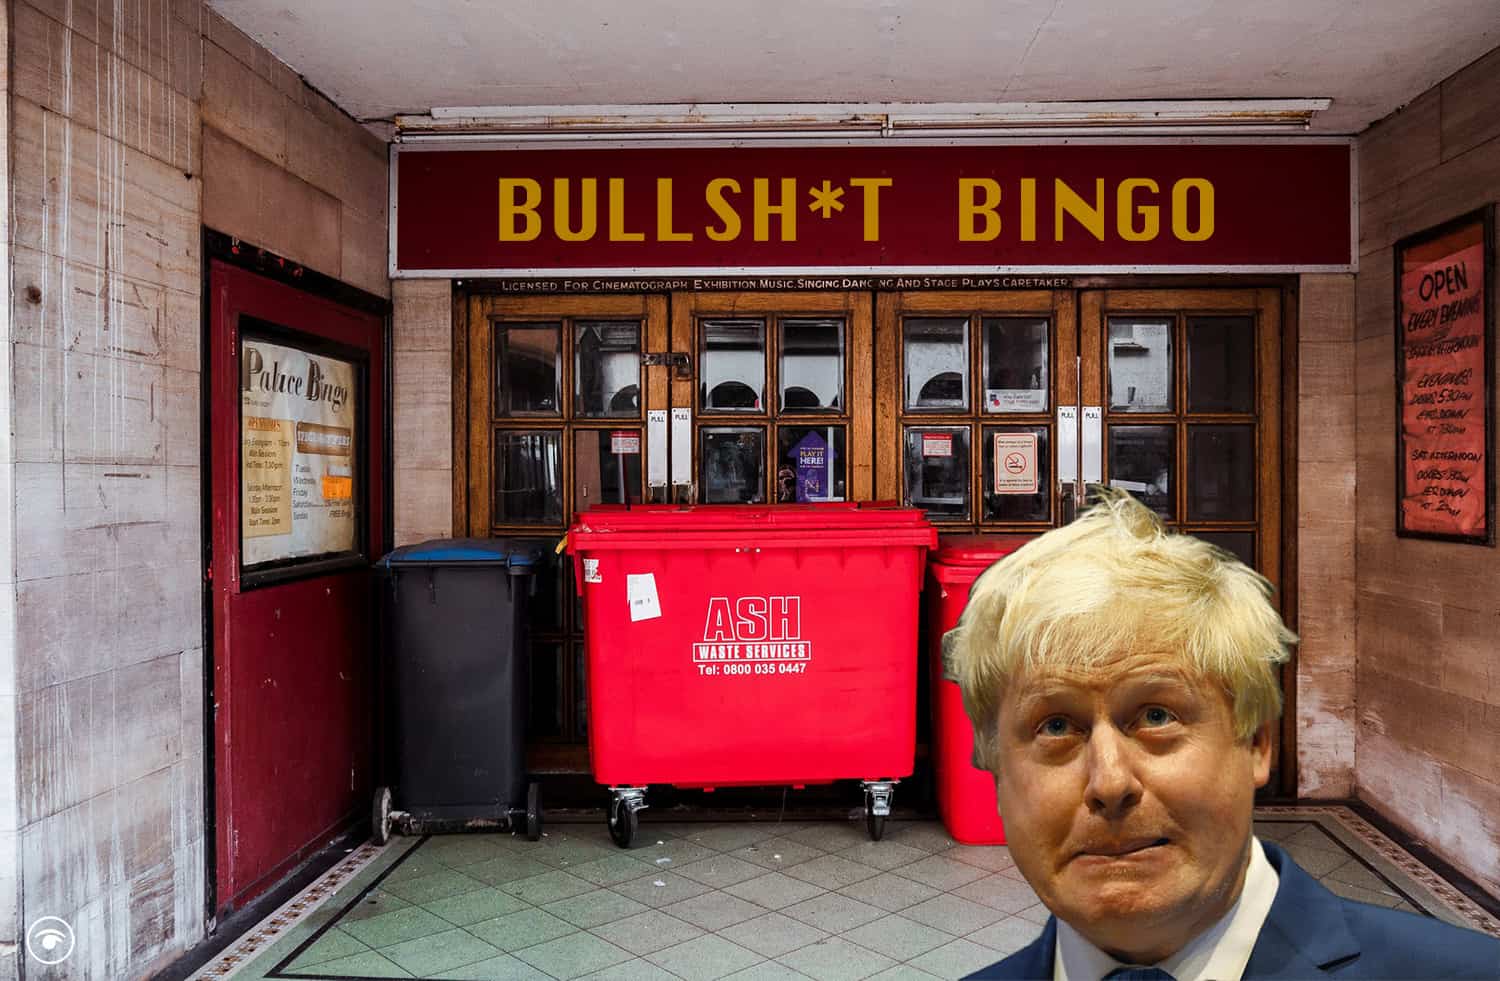 PMQs – Bullsh*t bingo caller Boris doesn’t call legs eleven as two fat ladies sing the end for ‘number 10 Johnson’s ken’